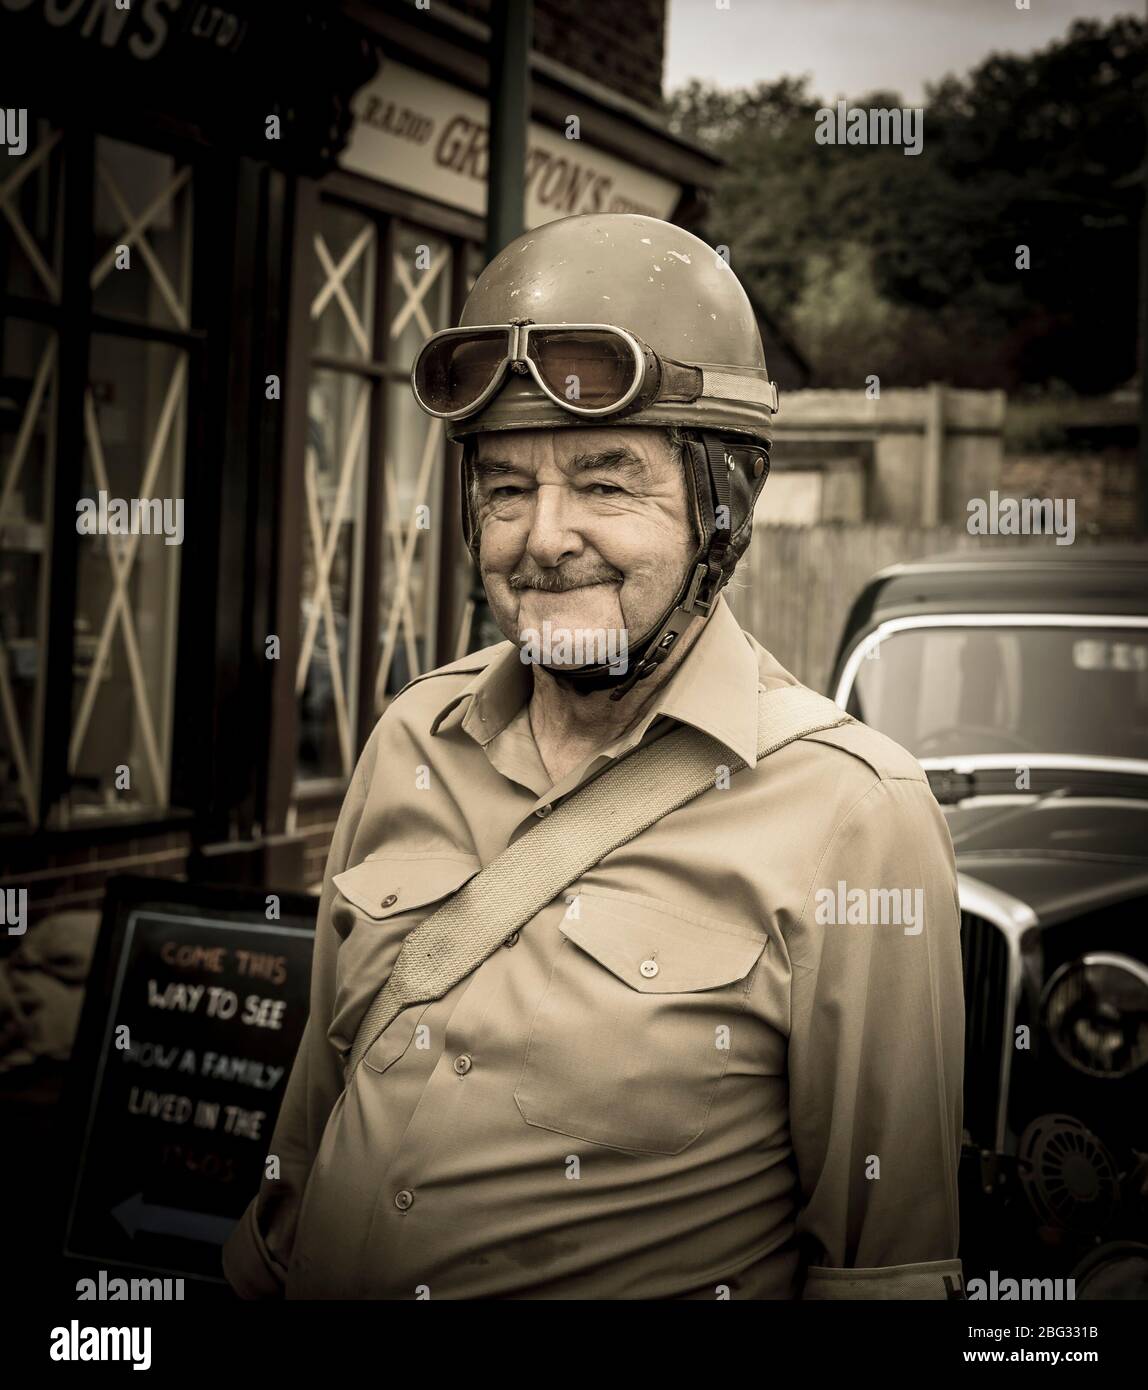 Close up of senior man dressed in 1940s costume as vintage motorcycle dispatch rider, military messenger, Black Country Museum, 1940s wartime event UK. Stock Photo